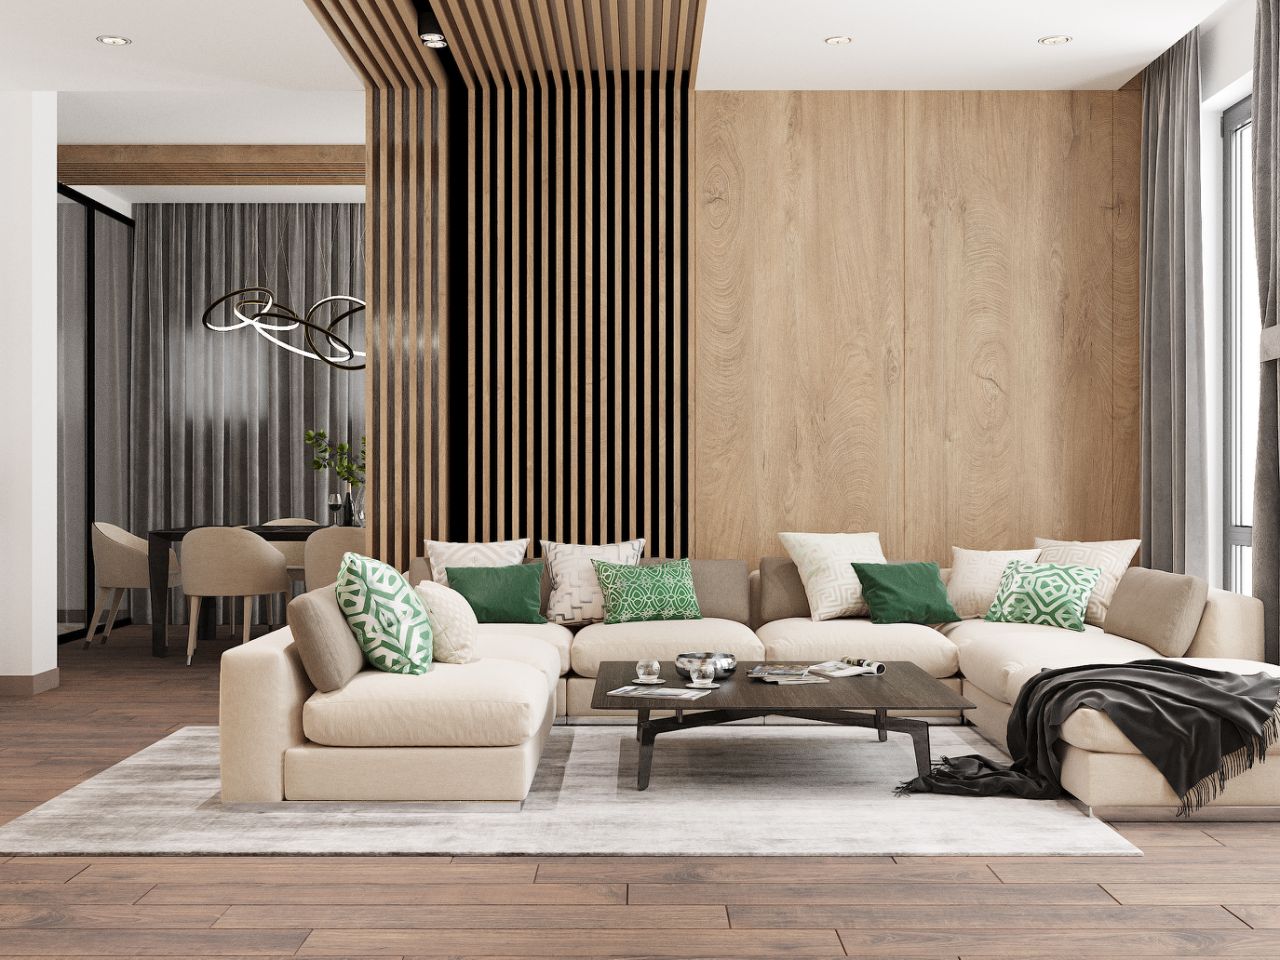 3D Rendering of a Chic modern living room with beige sofas, wooden accents, and green decorative pillows, leading to an elegant dining area.